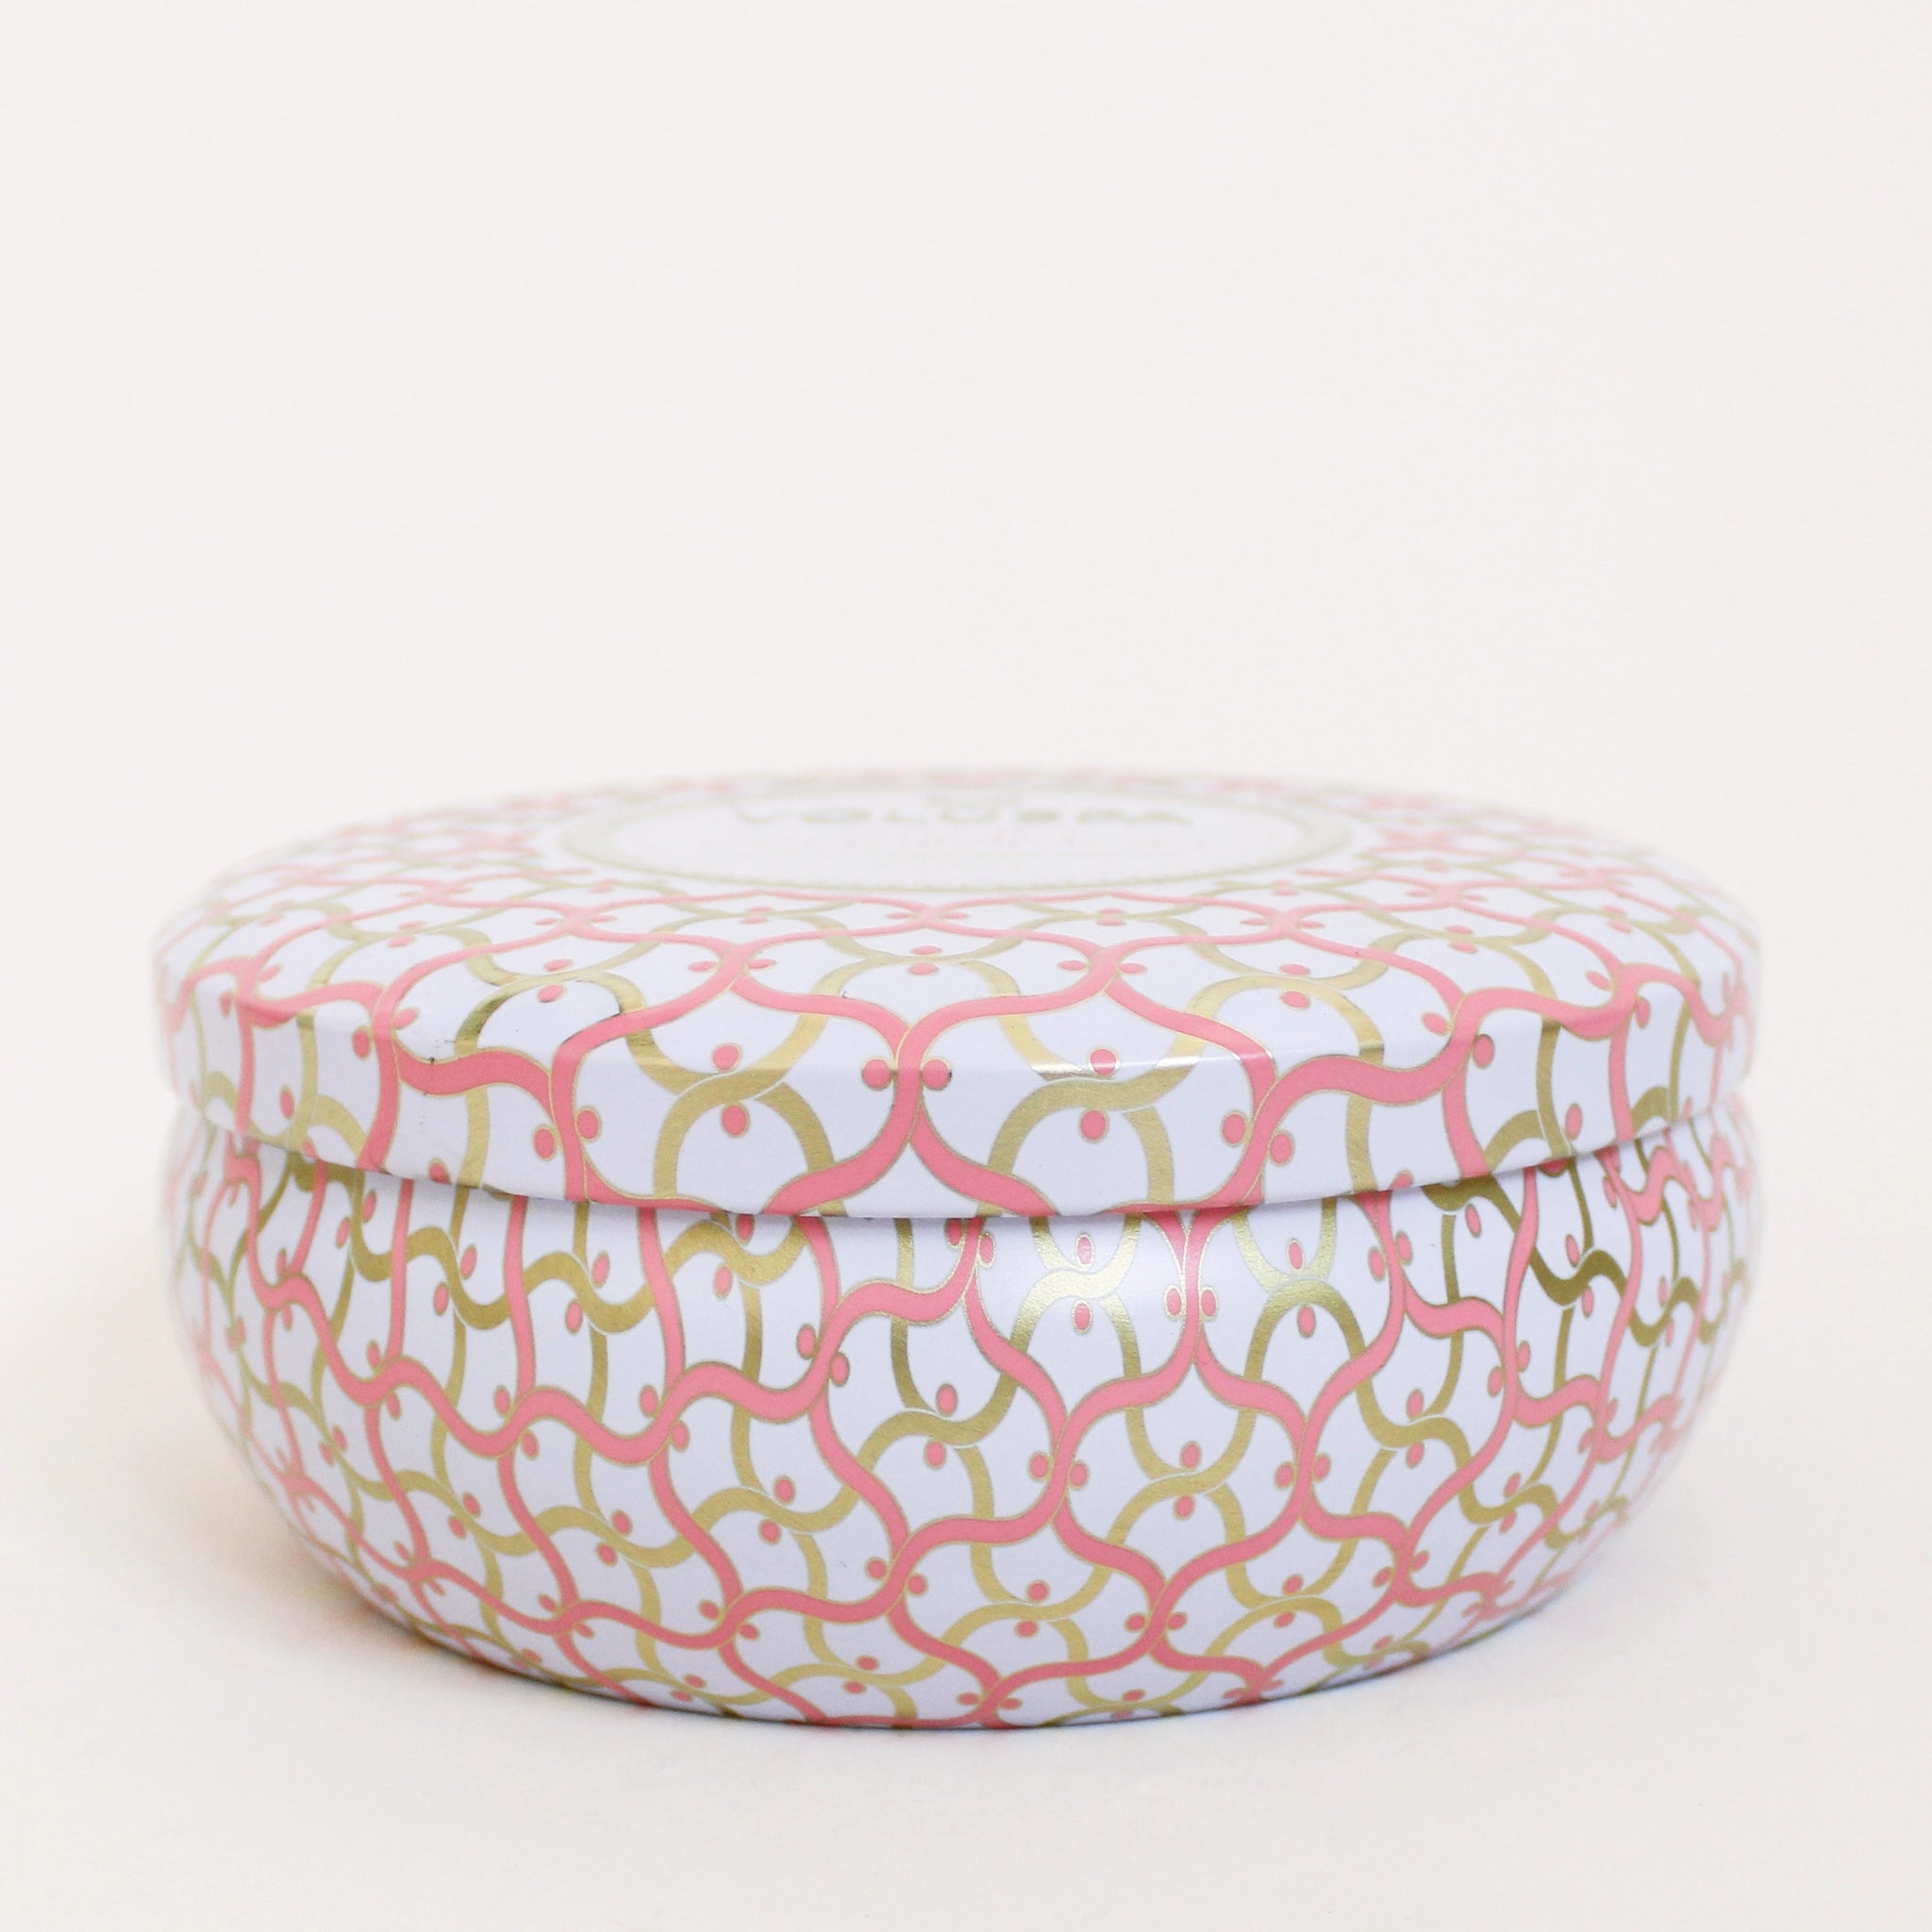 In front of a white background is a round tin candle. The tin is white with pink and gold swirly lines. There is a matching lid on top.